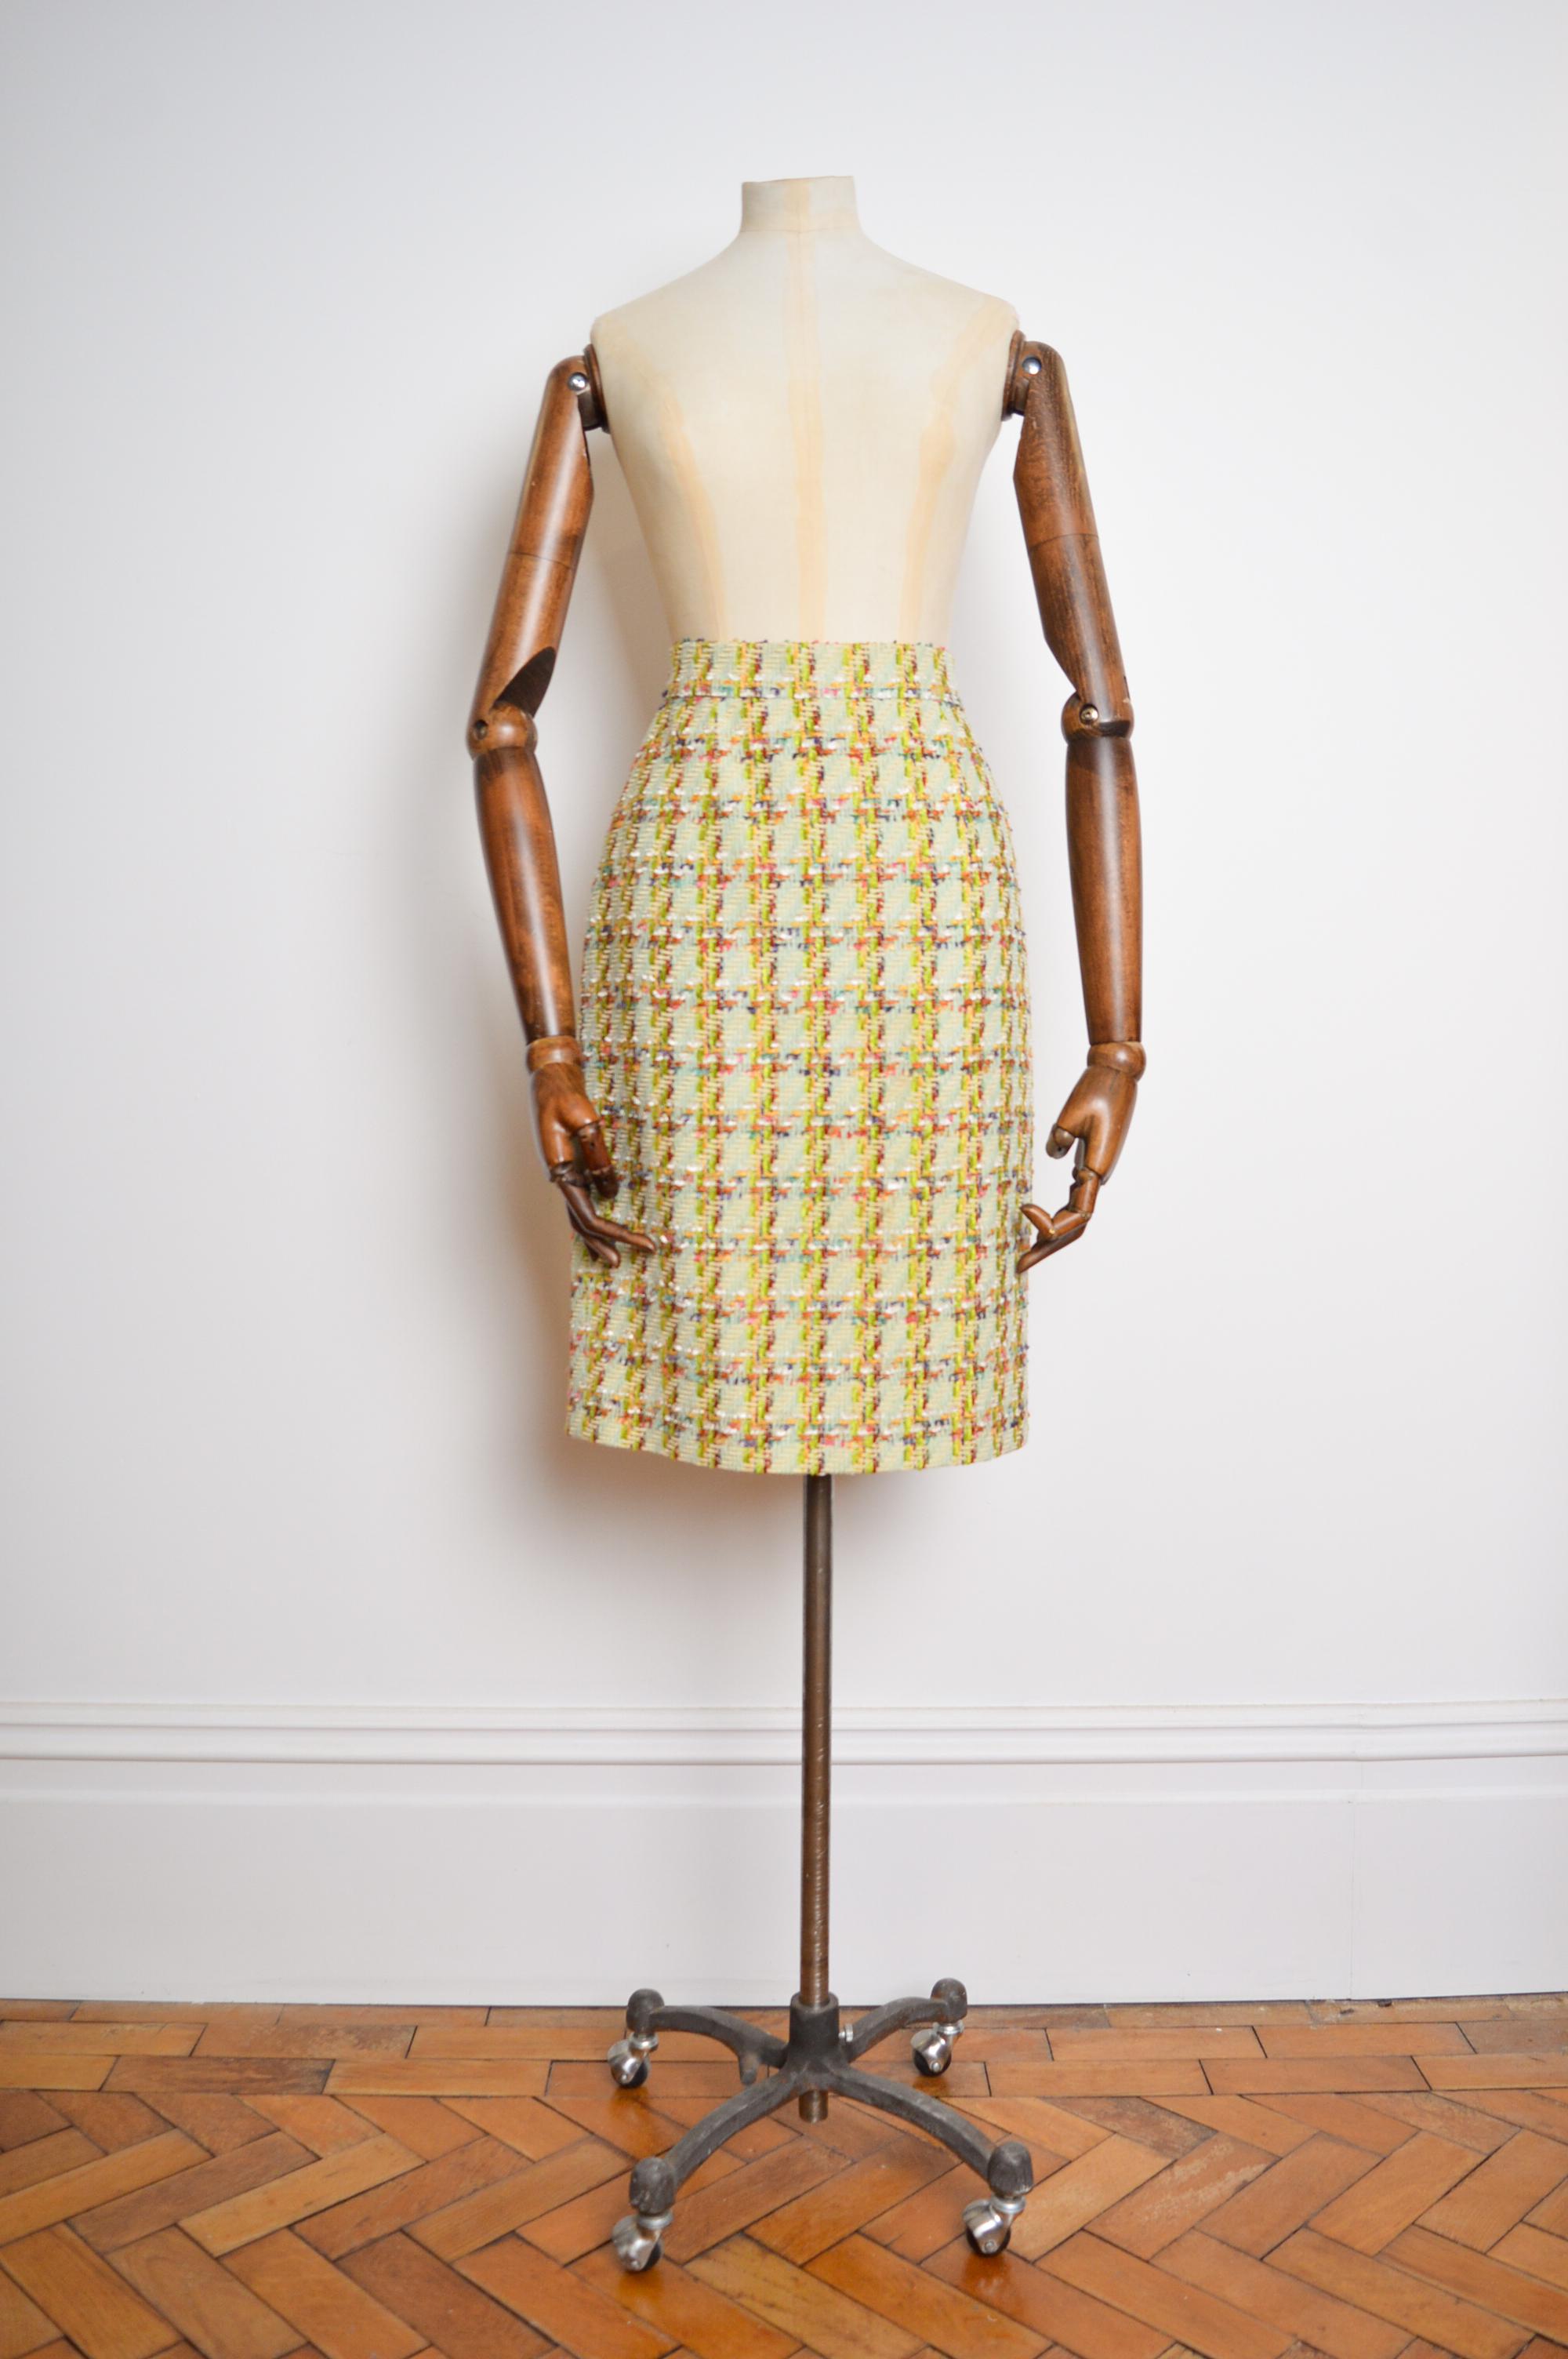 S/S 1993 ROCHAS Jewel Tone Lime Green Tweed Boucle Jacket & Skirt Matching Set For Sale 3